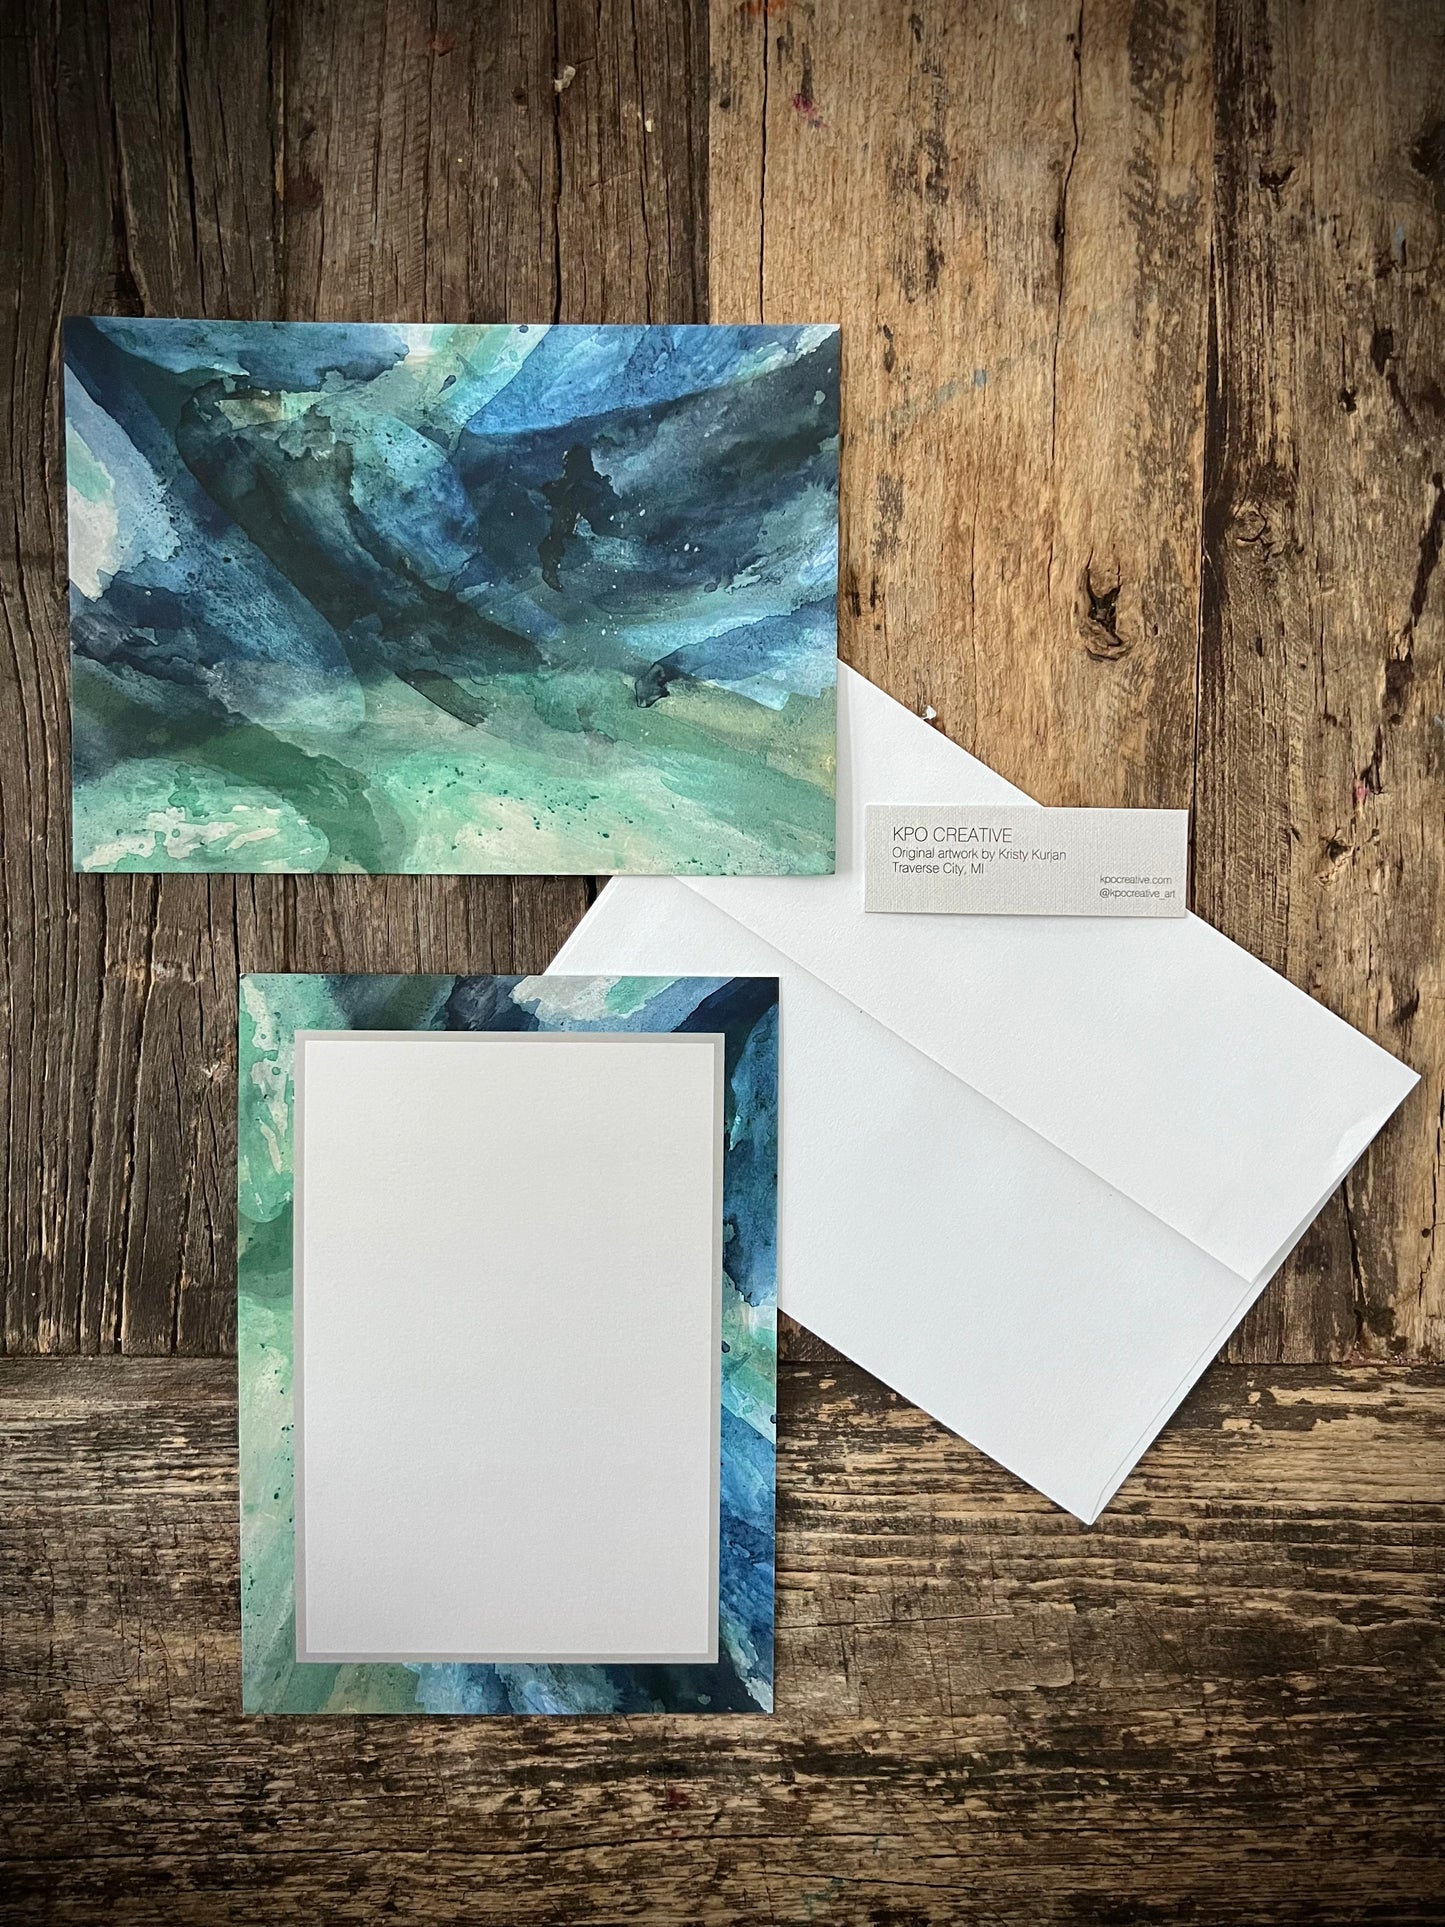 Set of 10 individually packaged art note cards 5” x 7” by Kristy Kurjan